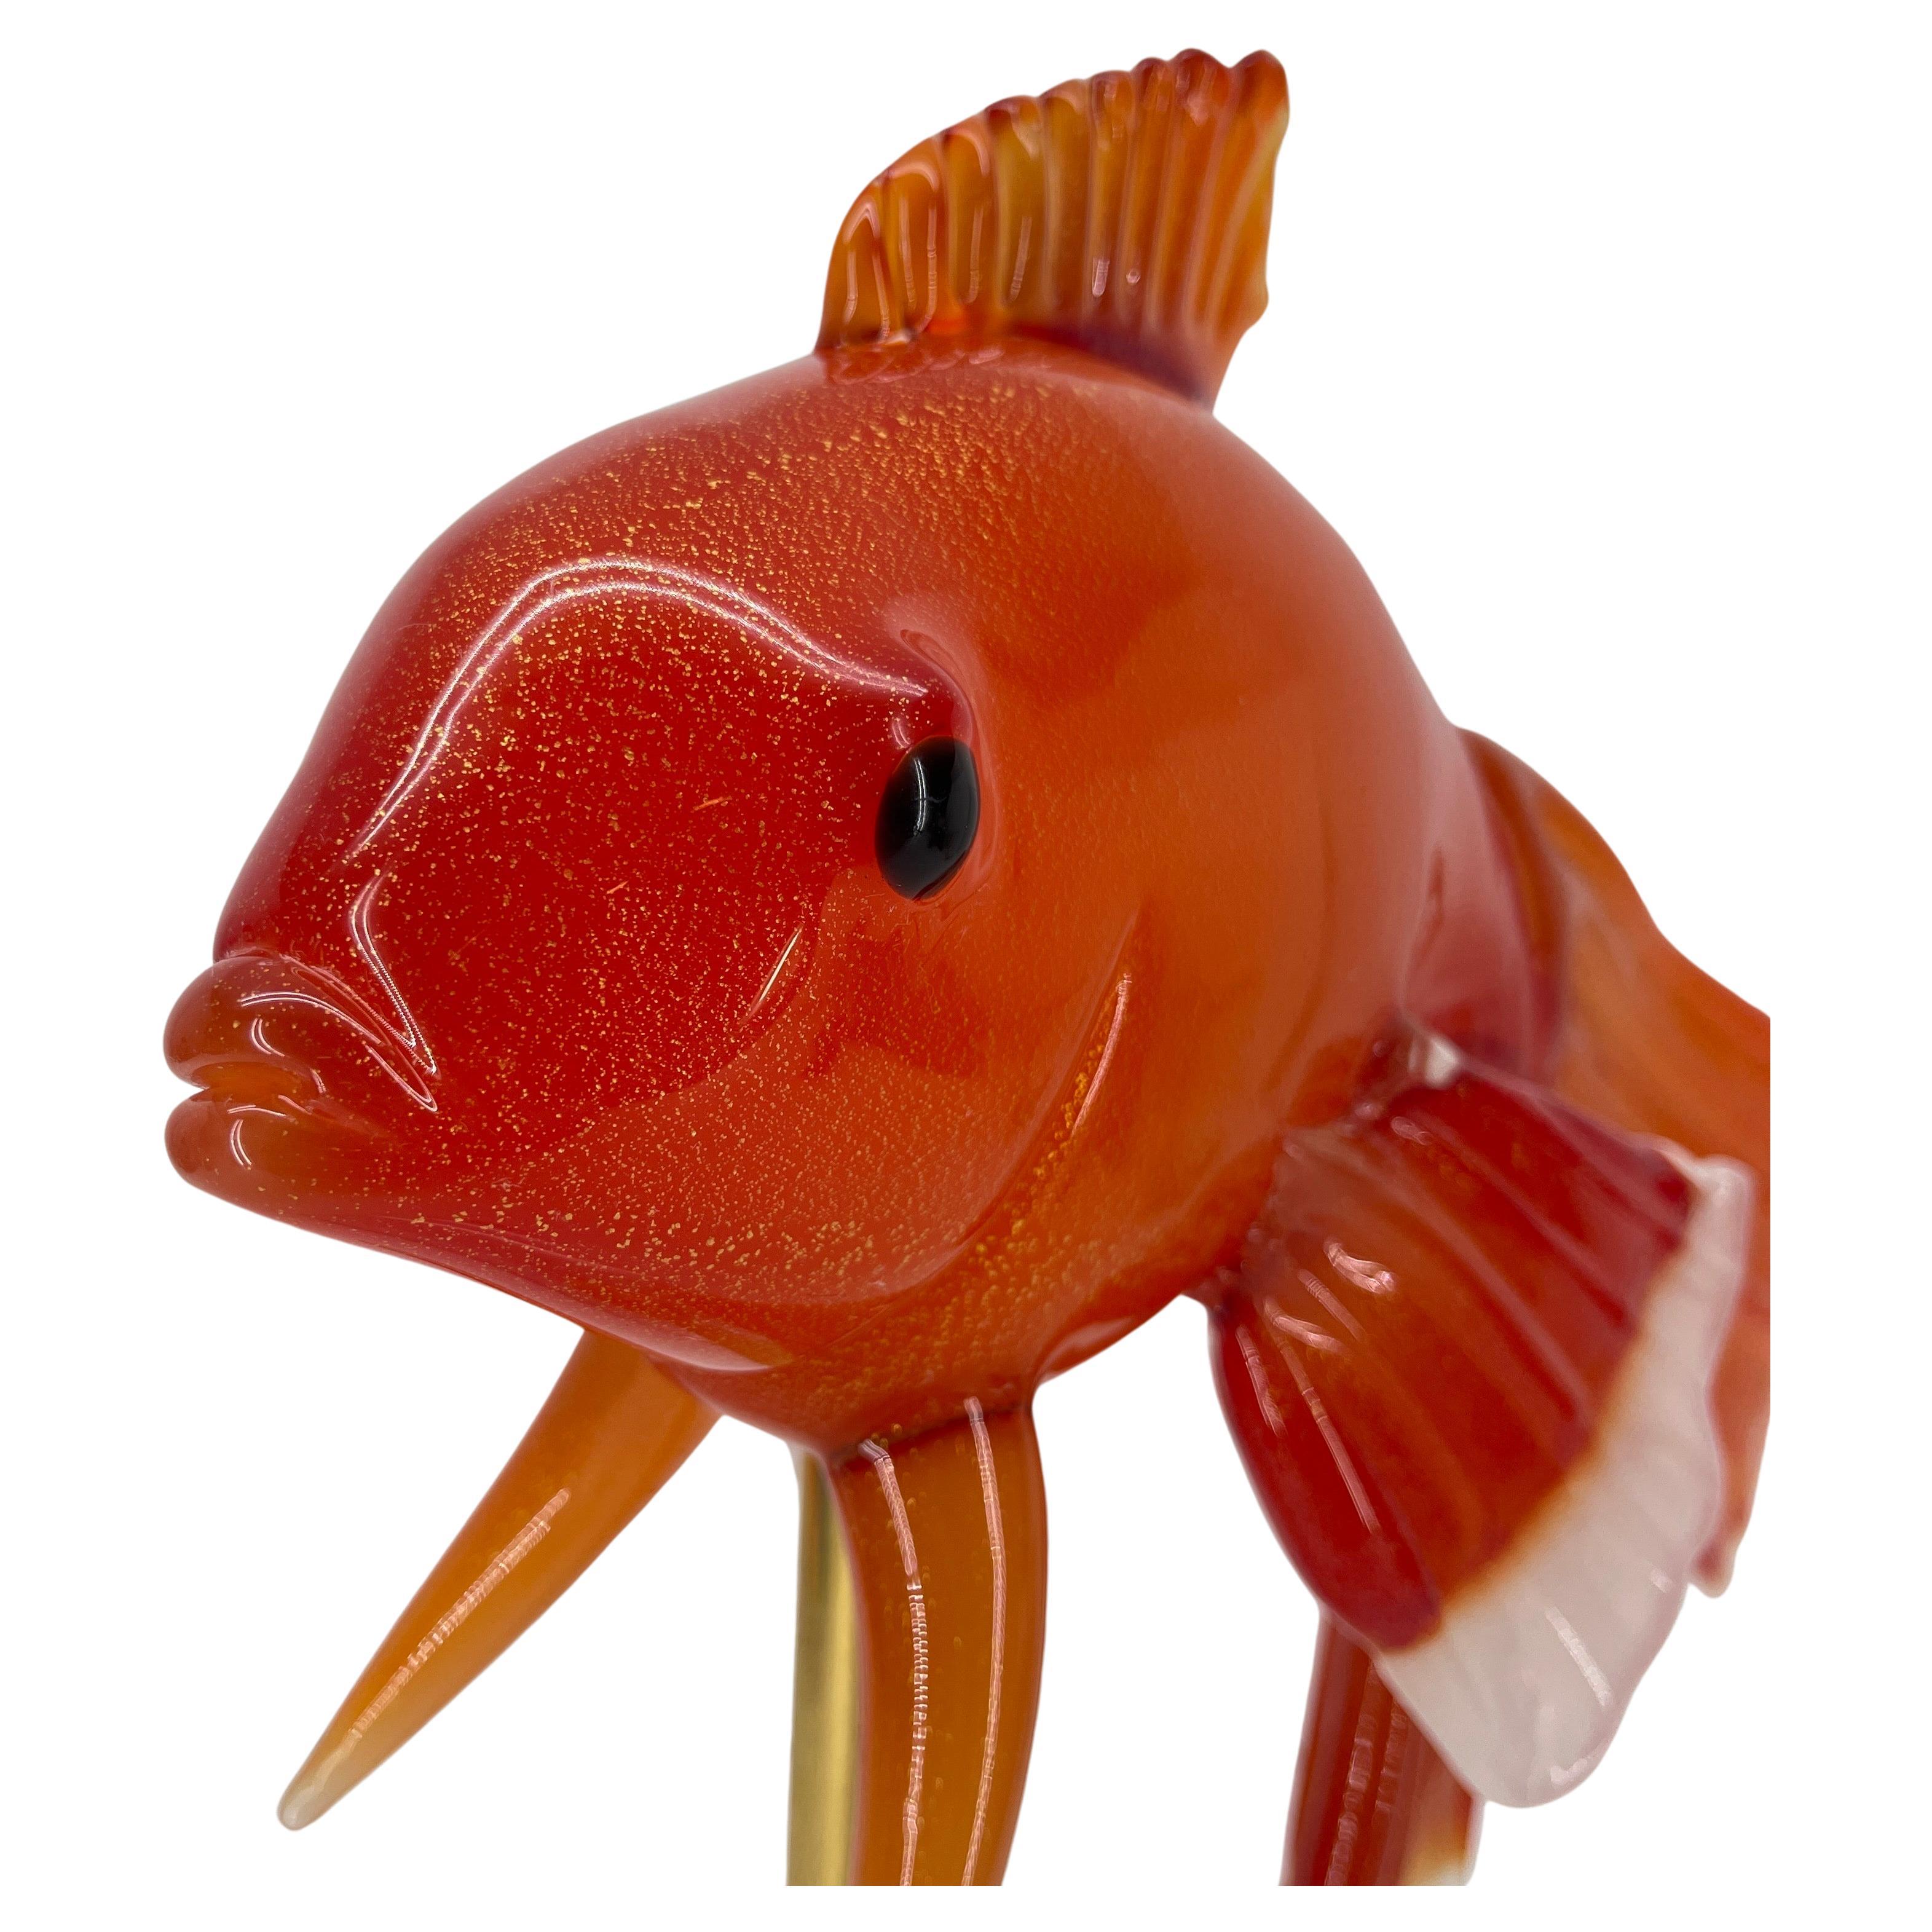 Large sculptural fish in orange and white glass on thick Lucite base.
Signed by Murano artist Pino Signoretto, limited edition 14/250.

Pino Signoretto (1944-2017) was born in 1944 in a small town near Venice; in 1954 he started working in a